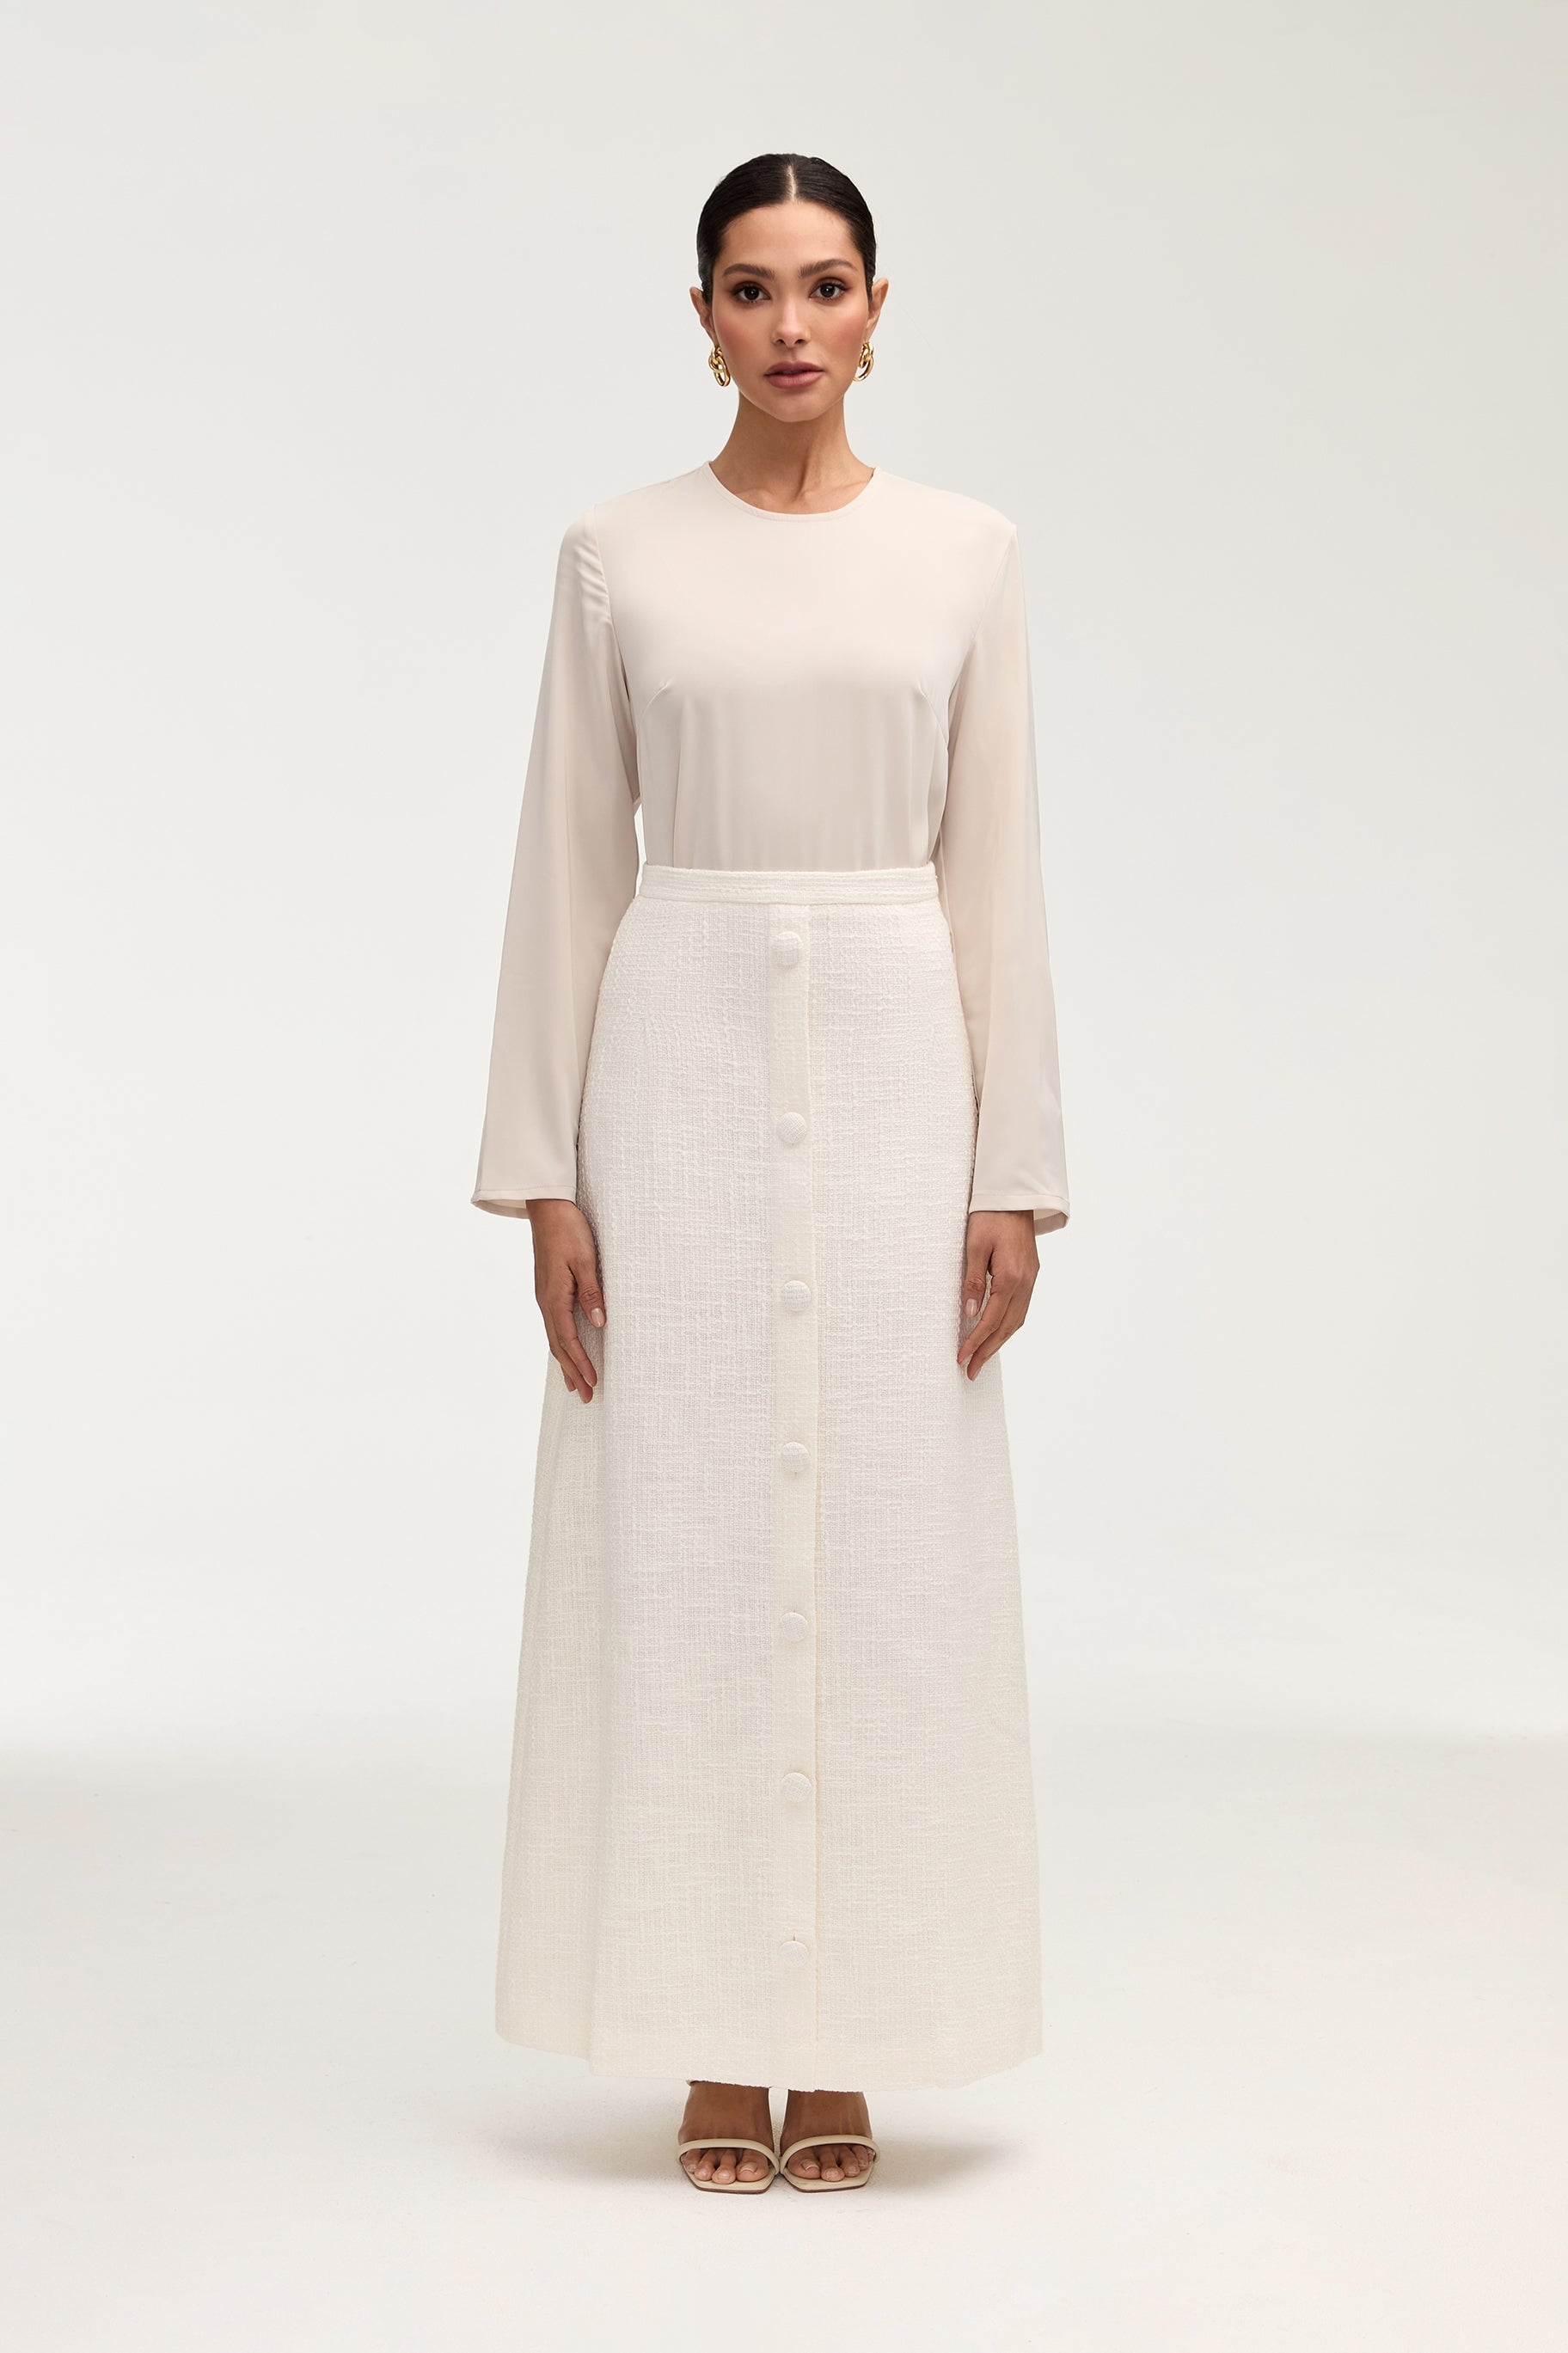 Sophia Tweed Button Front Maxi Skirt - Pearl Bottoms Veiled 